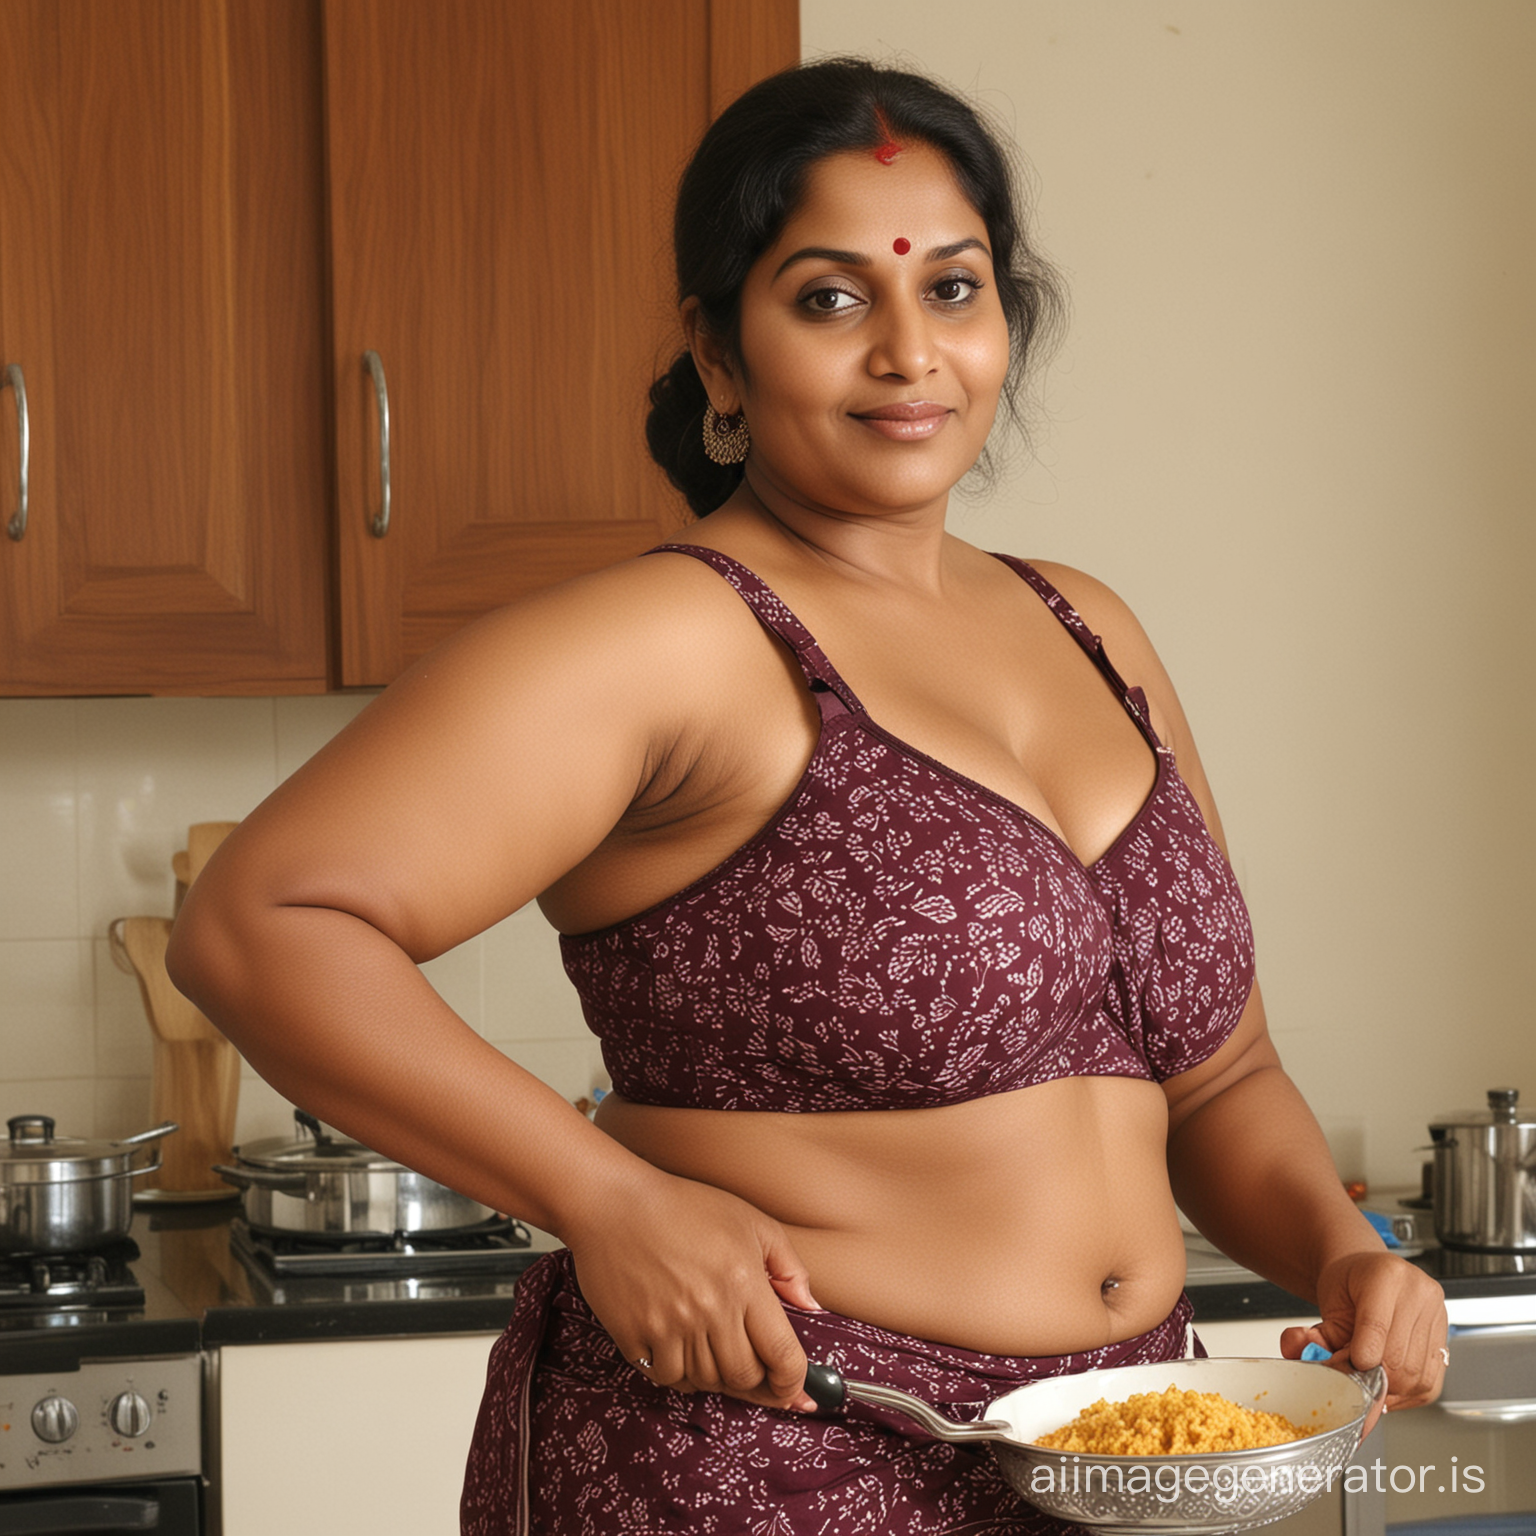 Dark skinned fat chubby, busty south indian aunty aged 50 in underwear cooking
